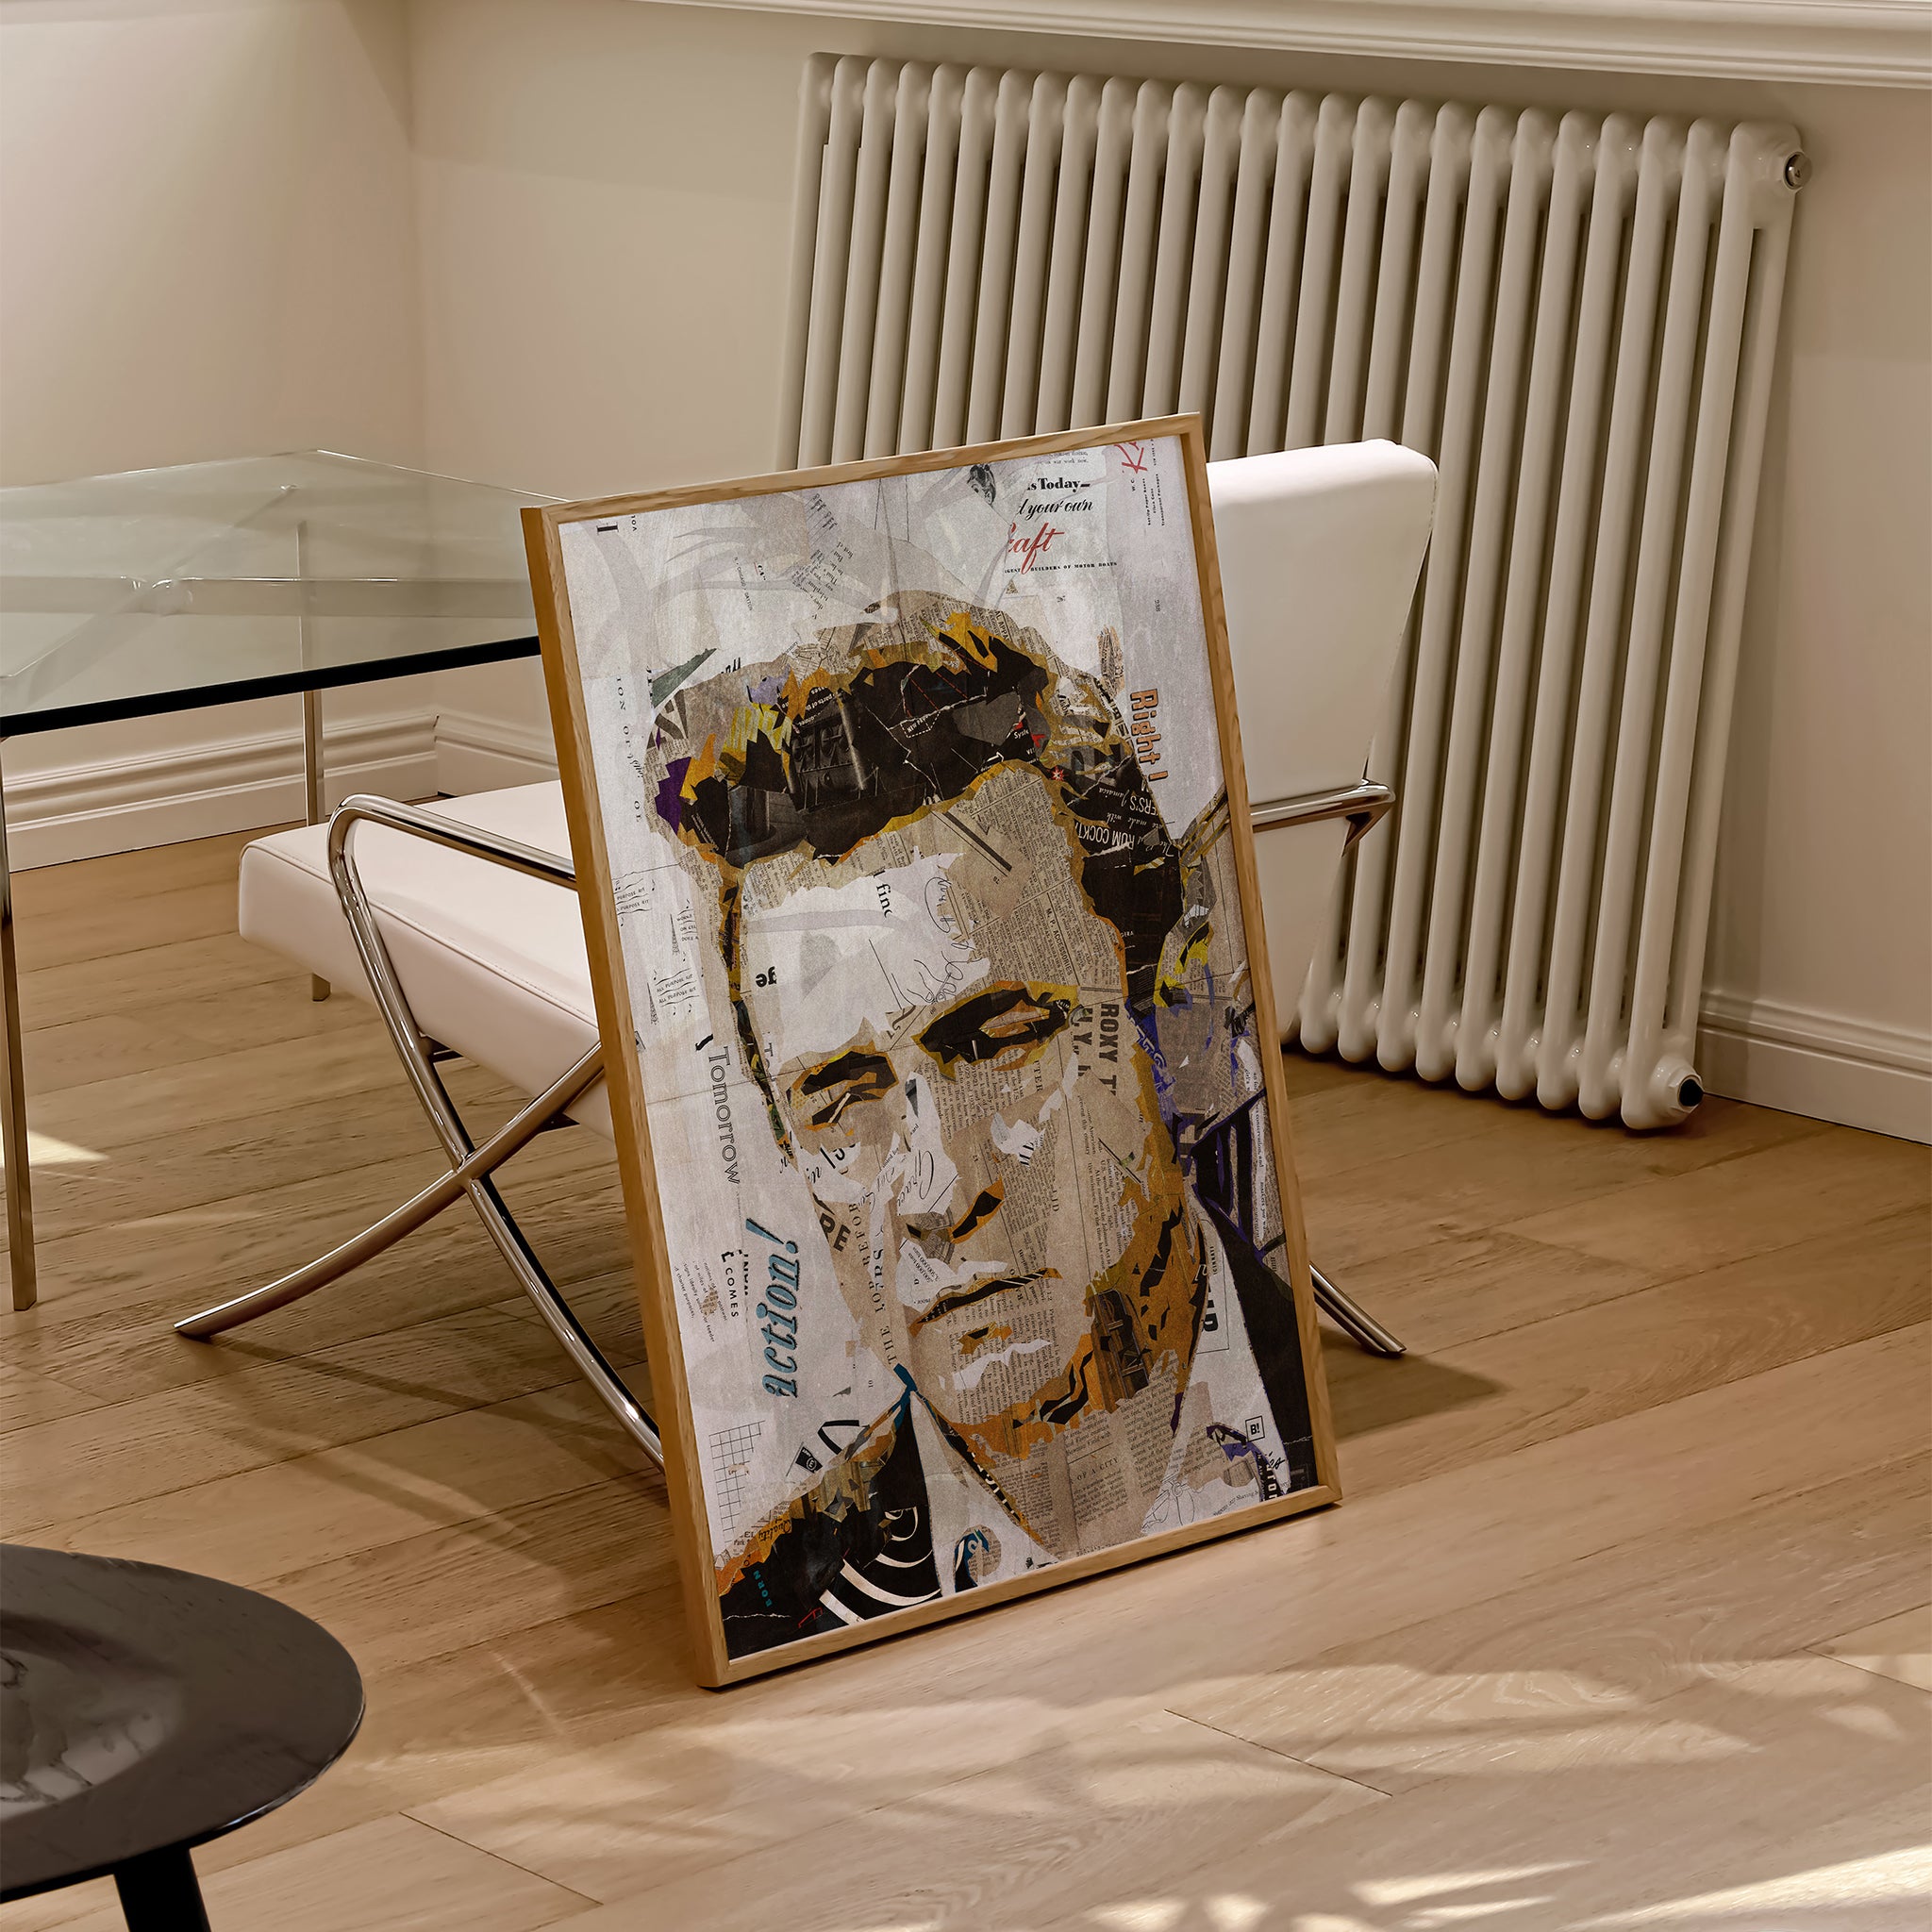 Be inspired by our iconic collage portrait art print of Johnny Cash. This artwork was printed using the giclée process on archival acid-free paper and is presented in a natural oak frame, capturing its timeless beauty in every detail.